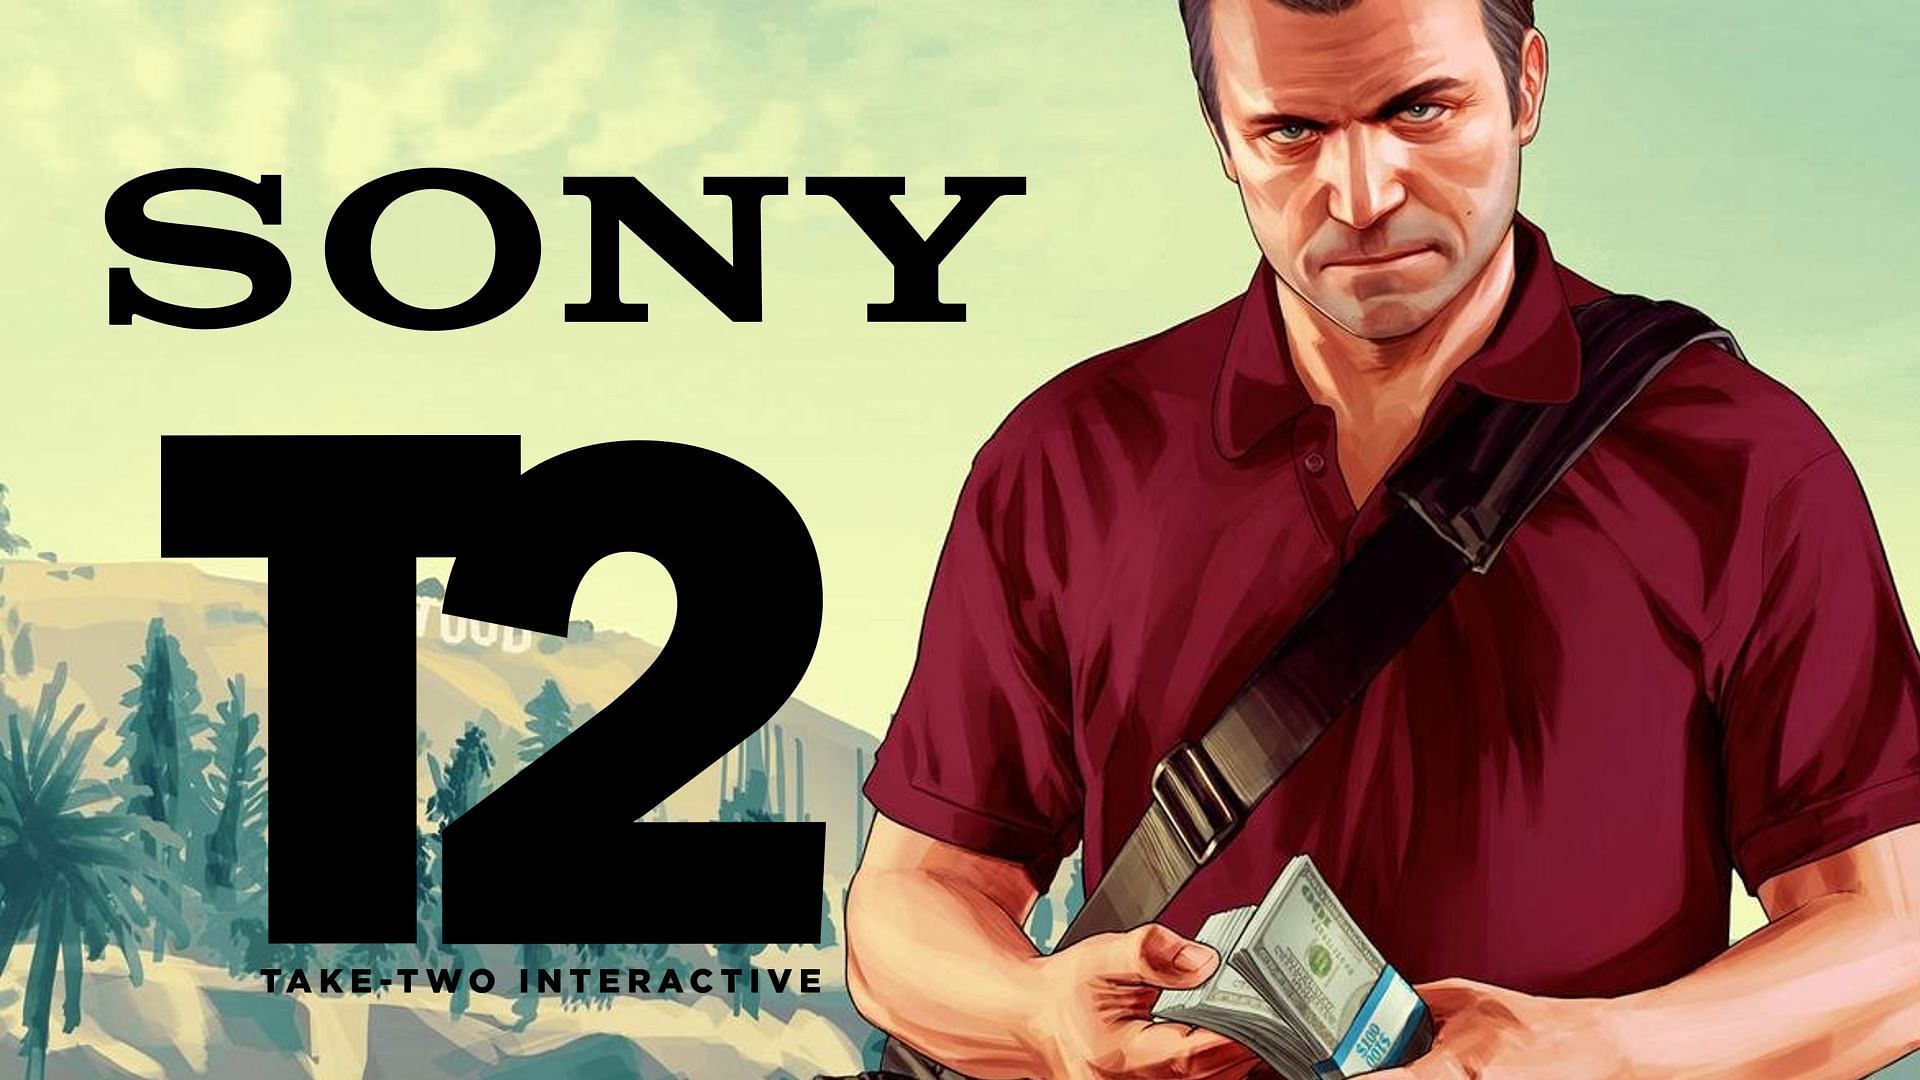 Rumor Suggests Take-Two Interactive Wants Rockstar Games To Step